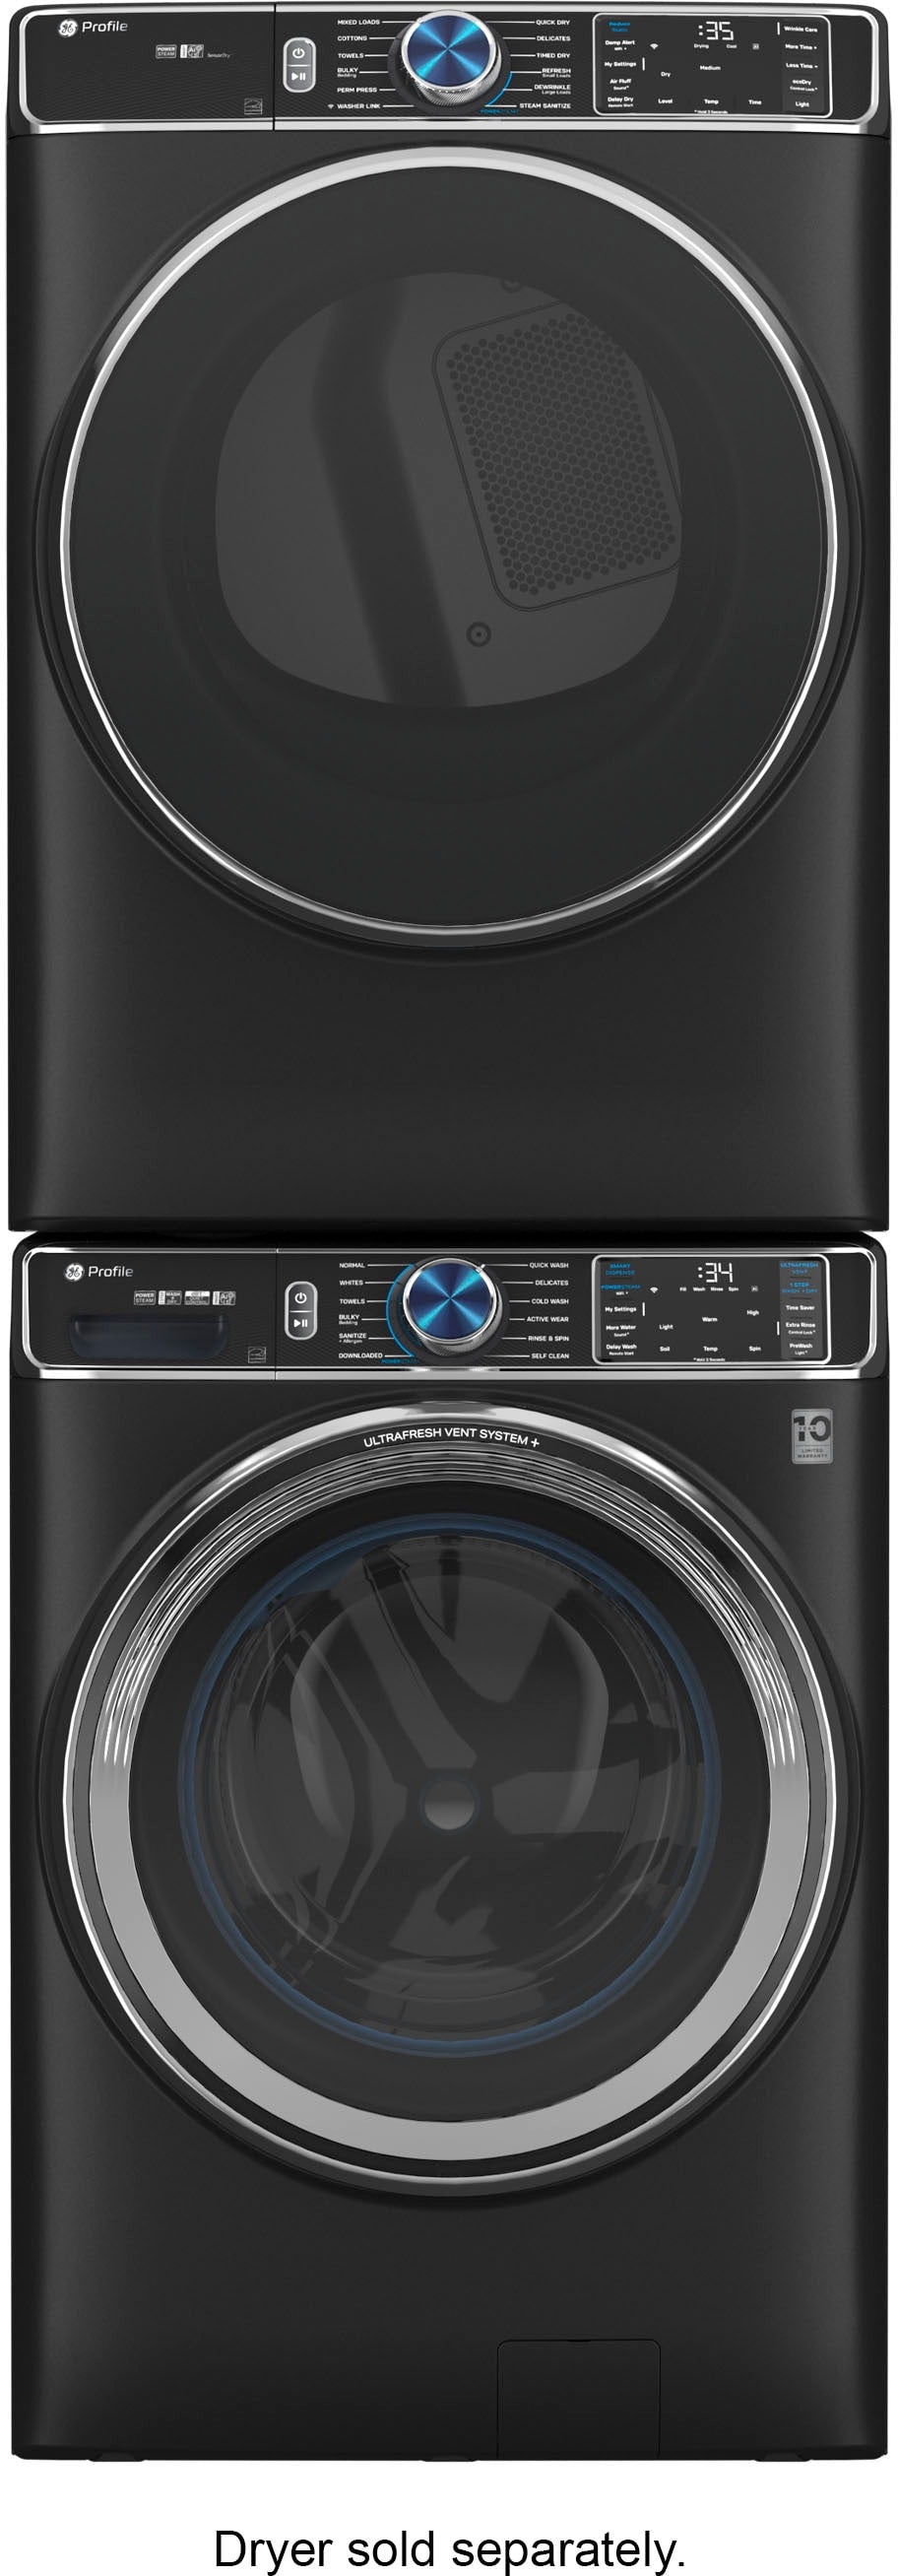 GE Profile - 5.3 cu. ft Smart Front Load Steam Washer w/ SmartDispense, UltraFresh Vent System & Microban Antimicrobial Technology - Carbon graphite_9